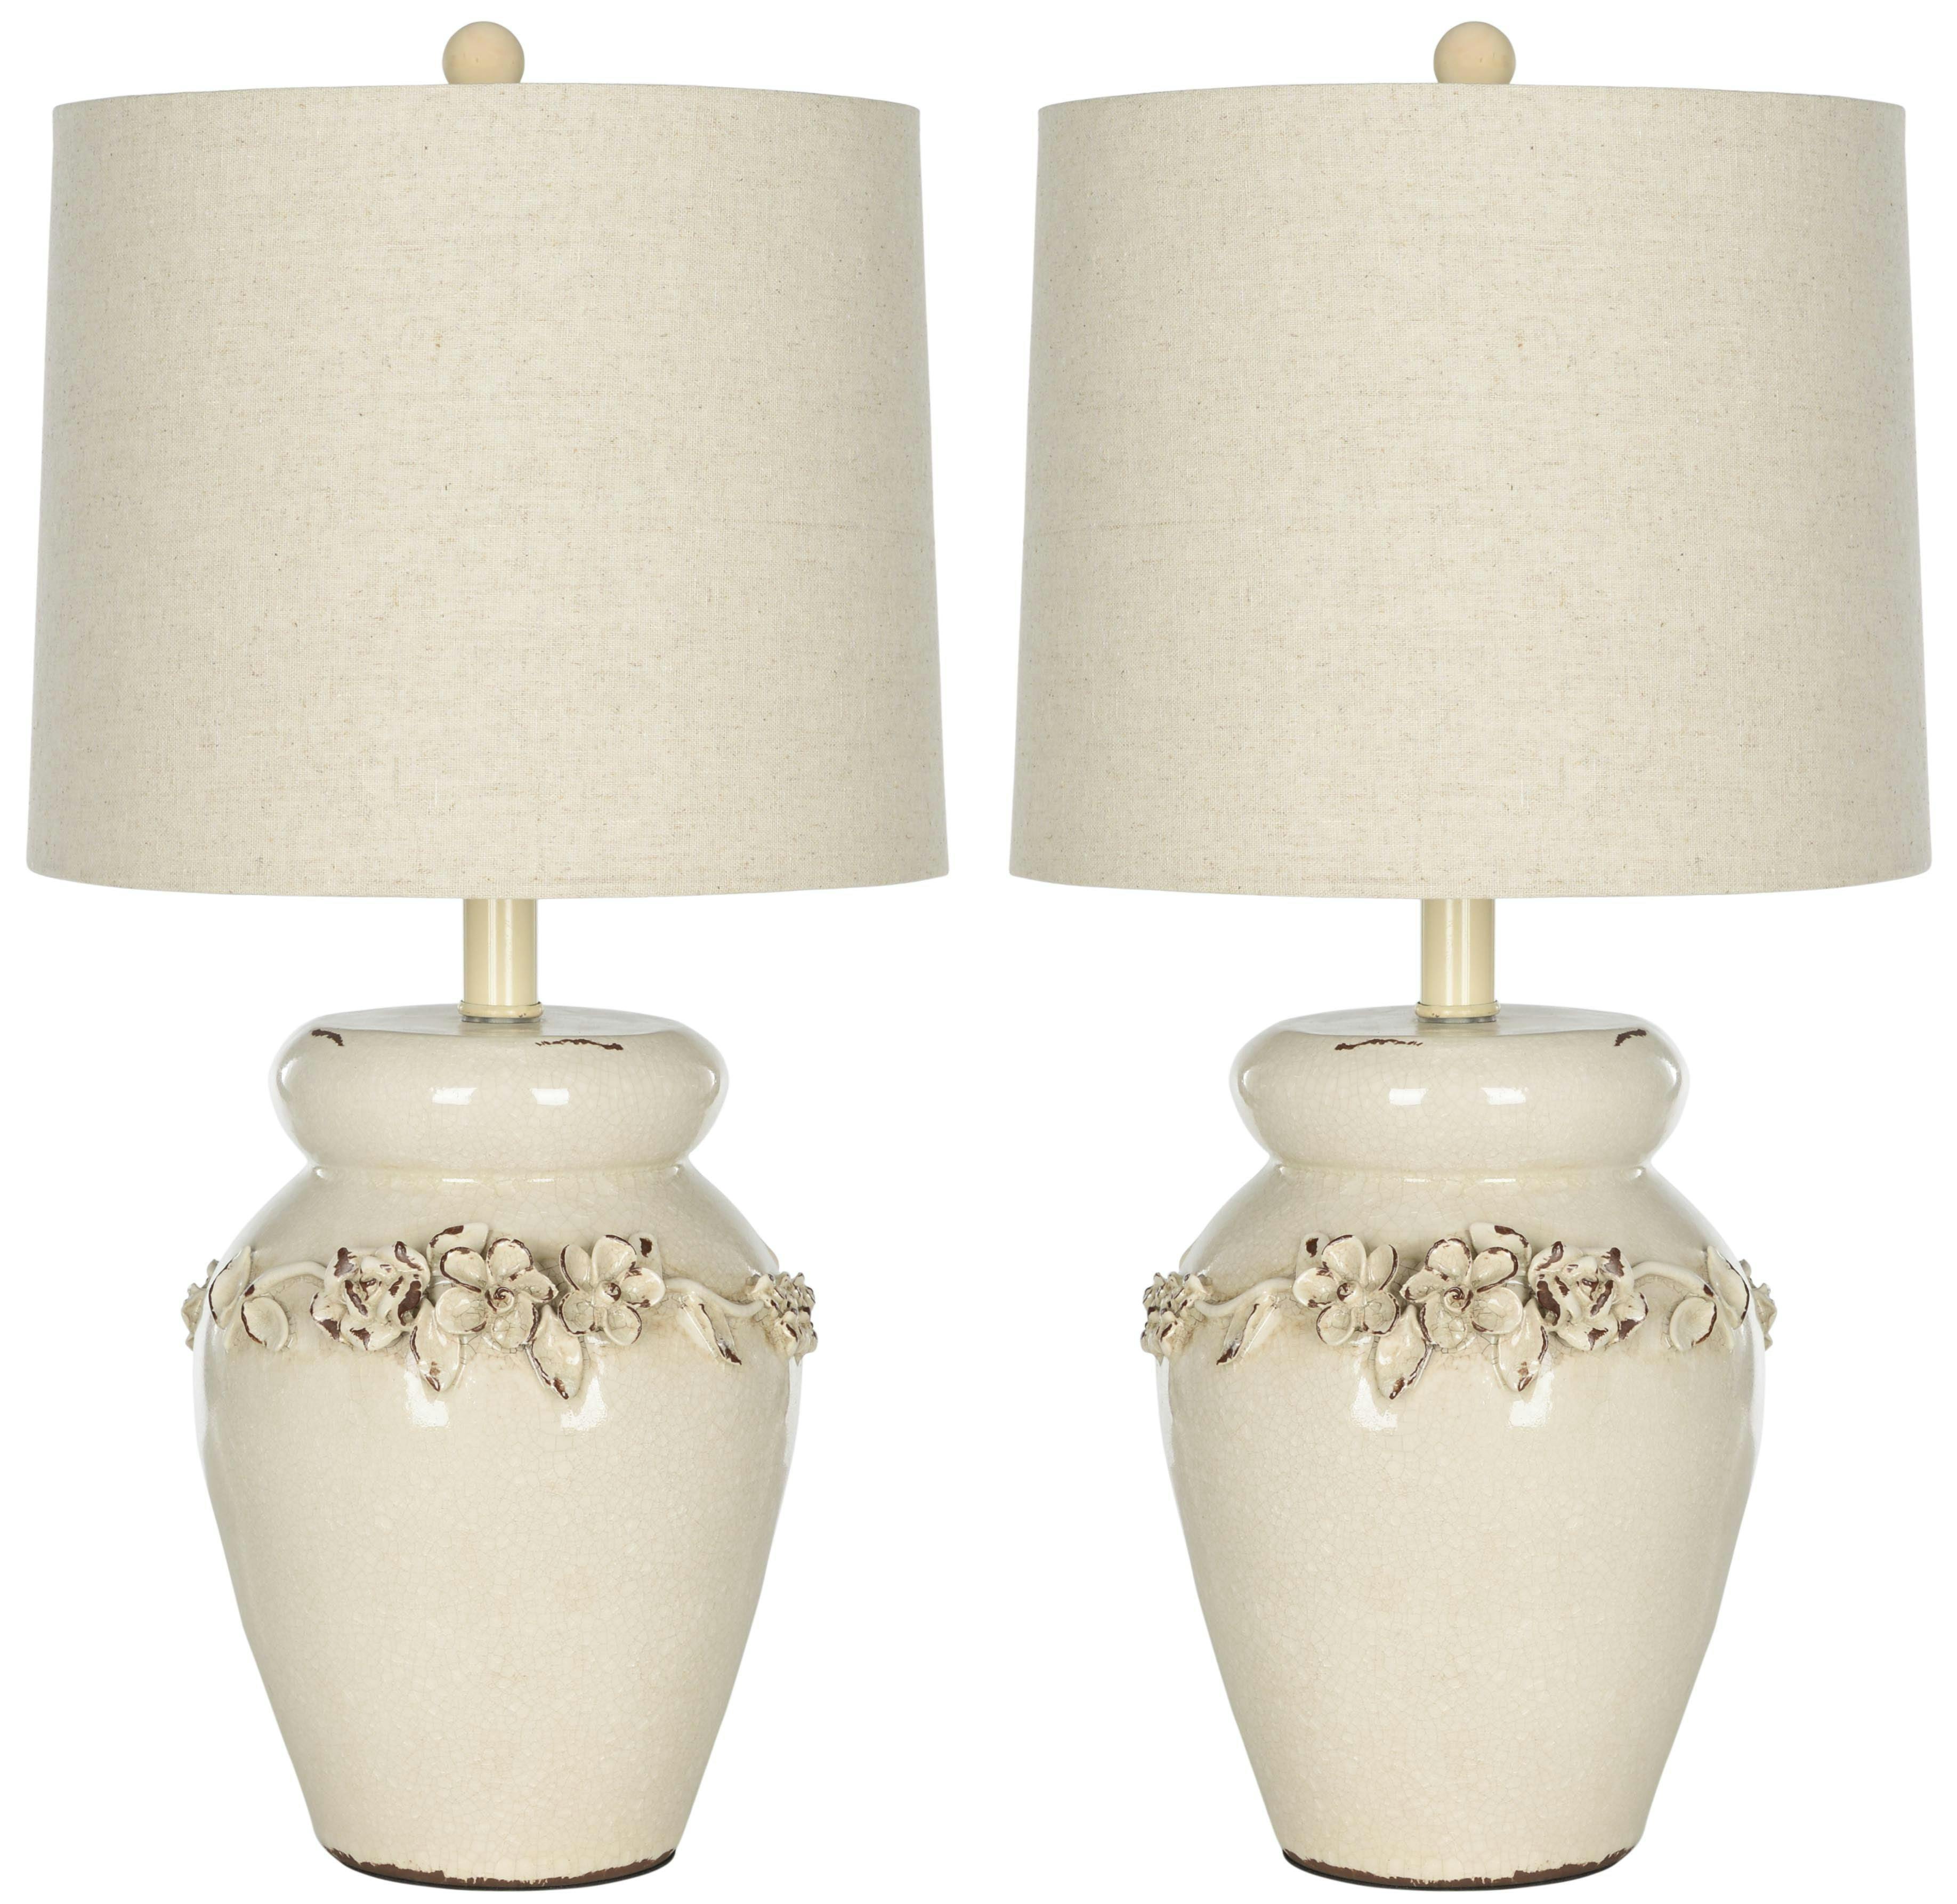 Tuscan Inspired Cream Ceramic Vase Table Lamp Set with Linen Shade